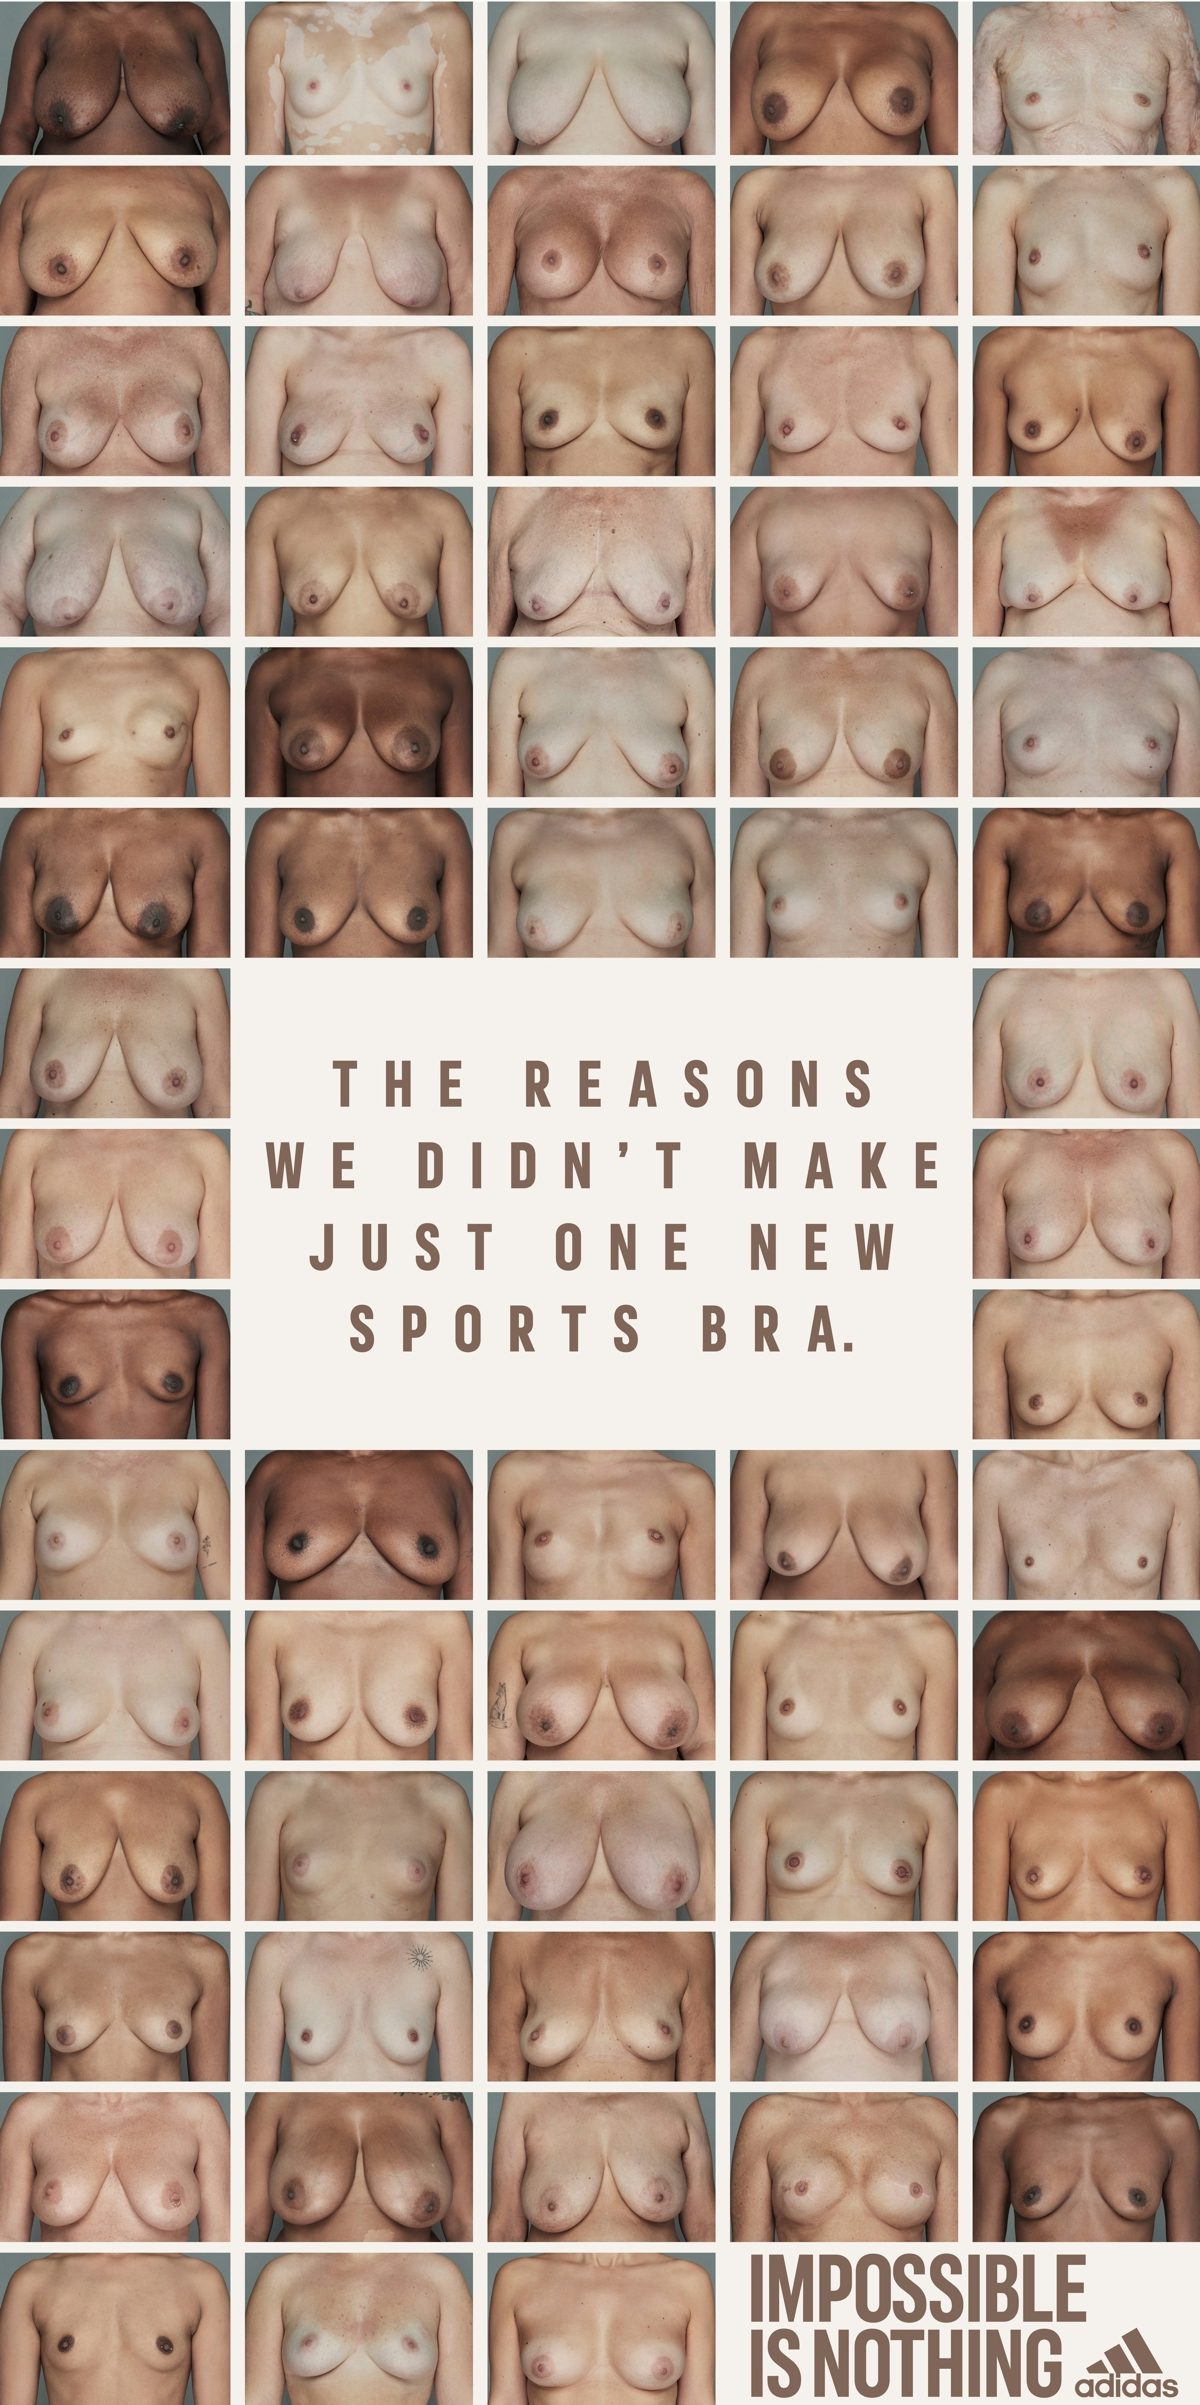 Nude Sports Tits - Adidas created a gallery of naked breasts to launch its sports bra range